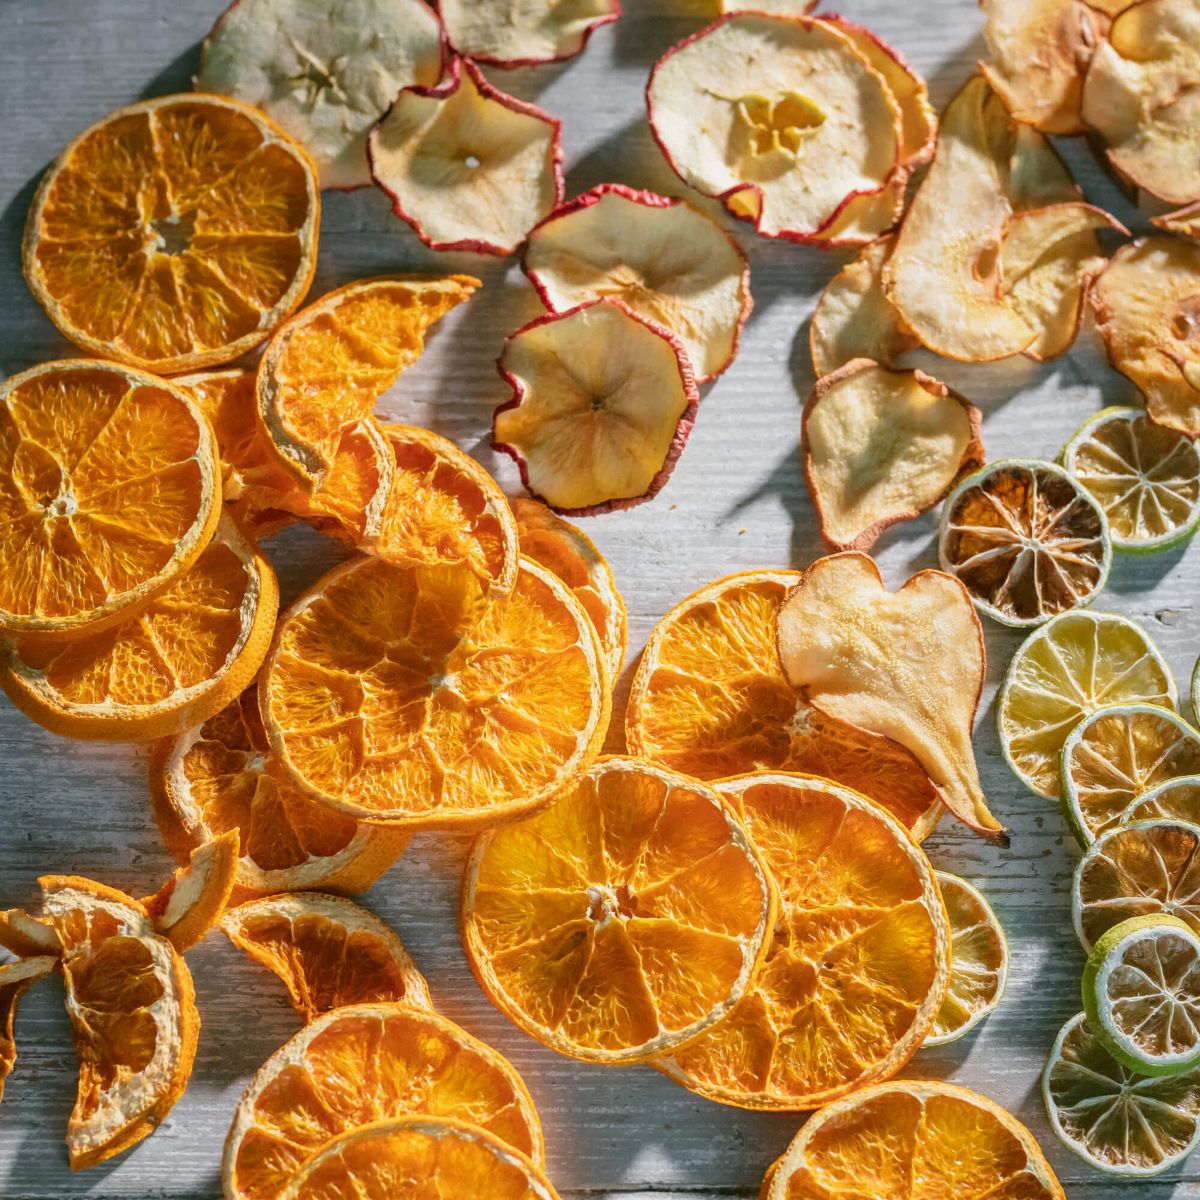 How To Store Dehydrated Fruit